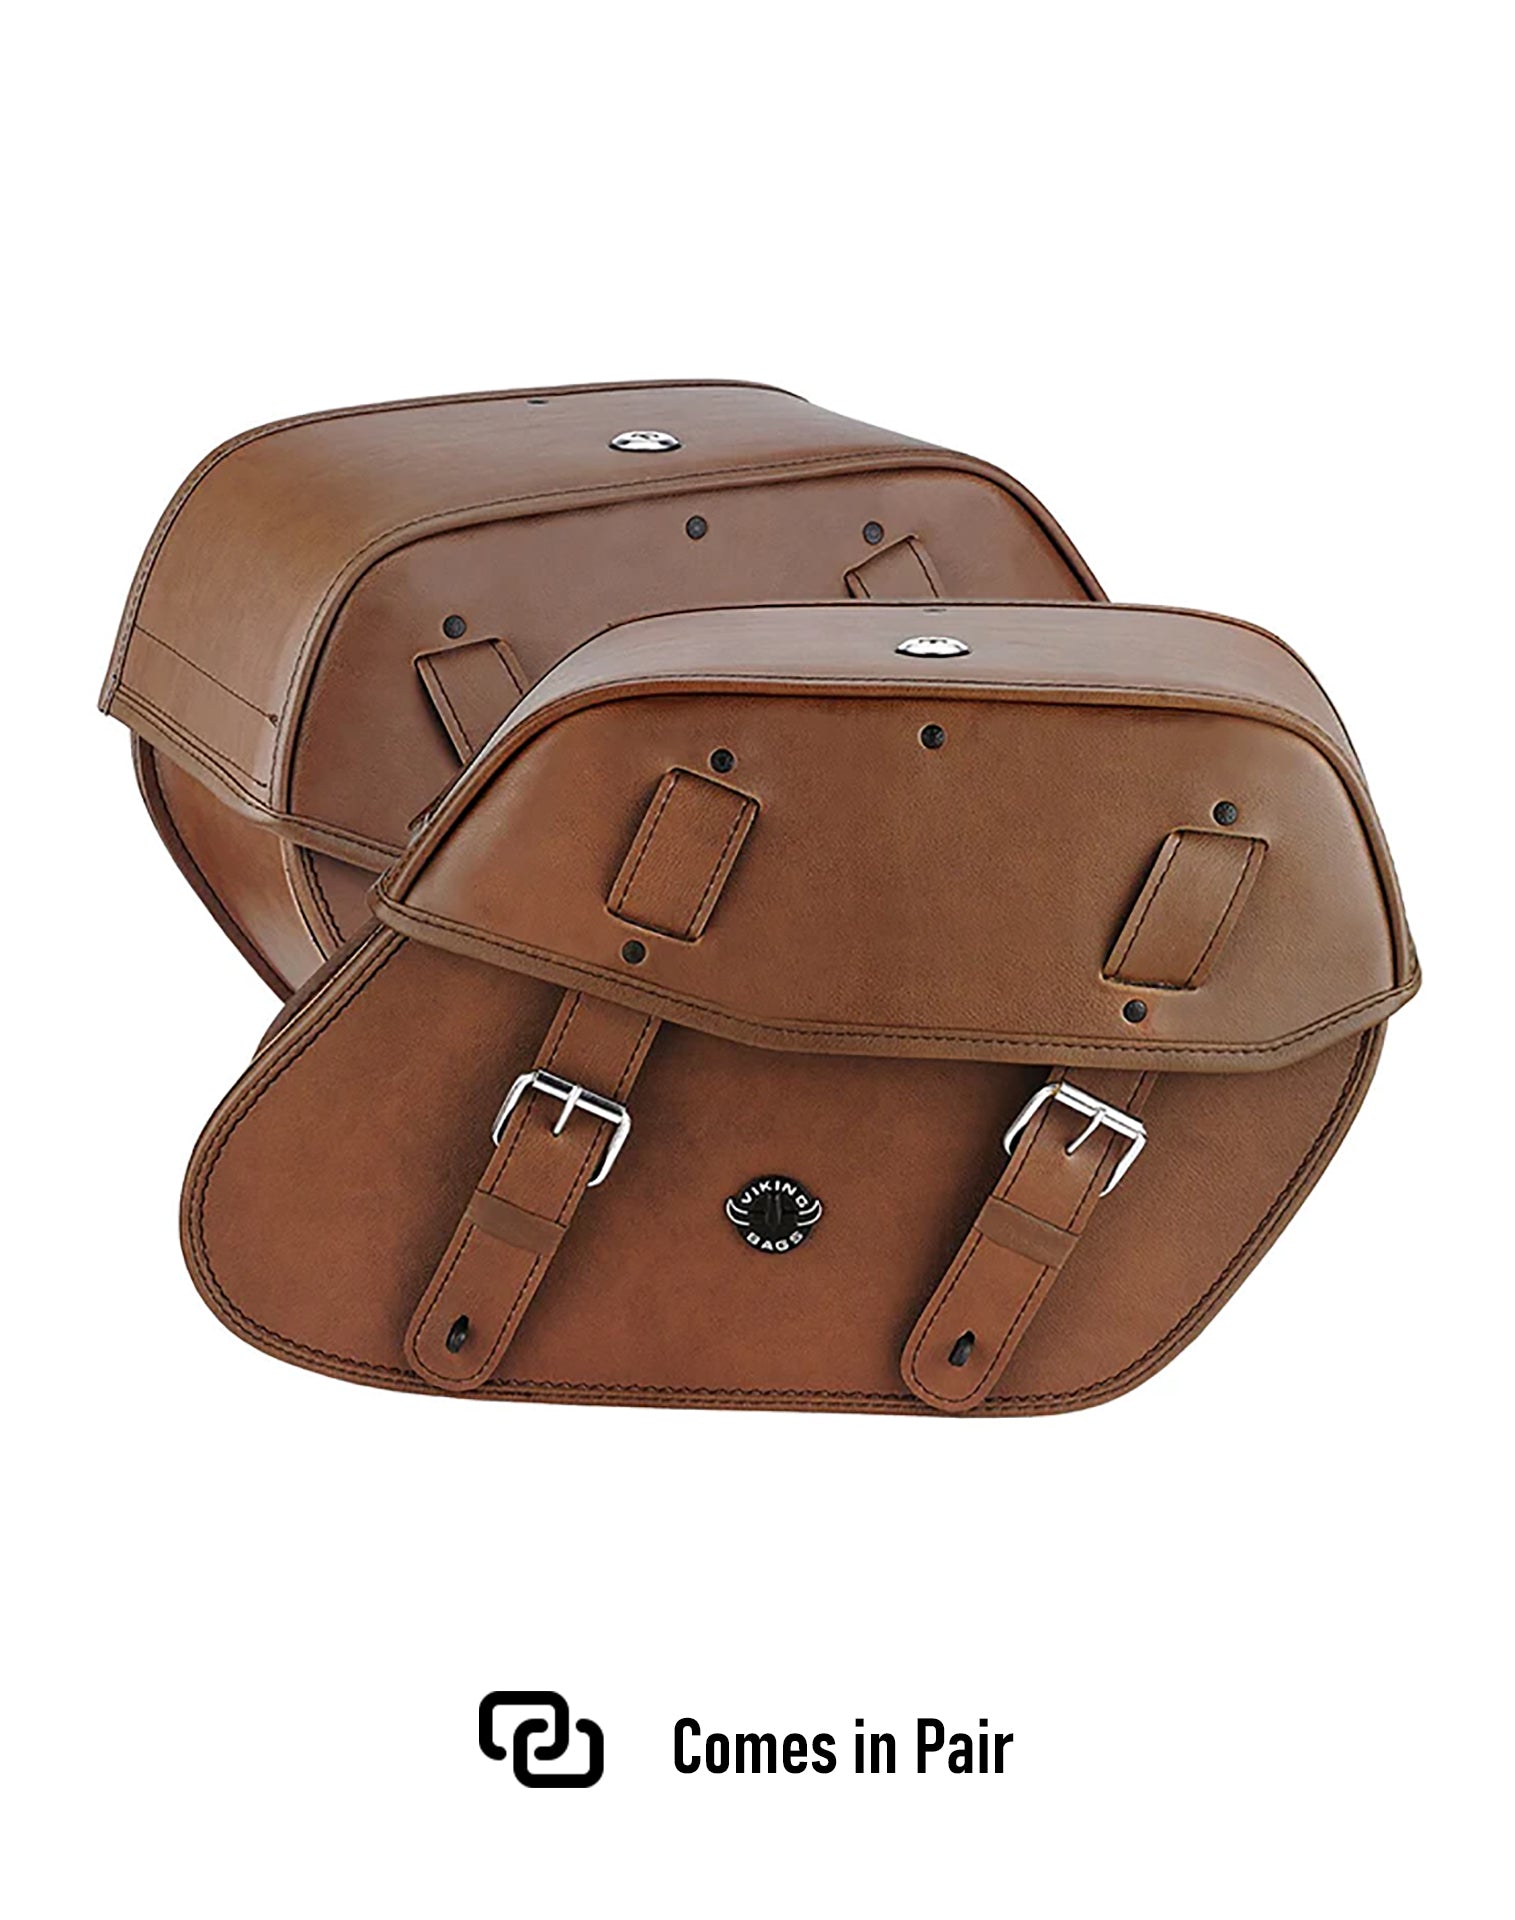 Viking Odin Brown Large Kawasaki Vulcan 2000 Vn2000 Leather Motorcycle Saddlebags Weather Resistant Bags Comes in Pair